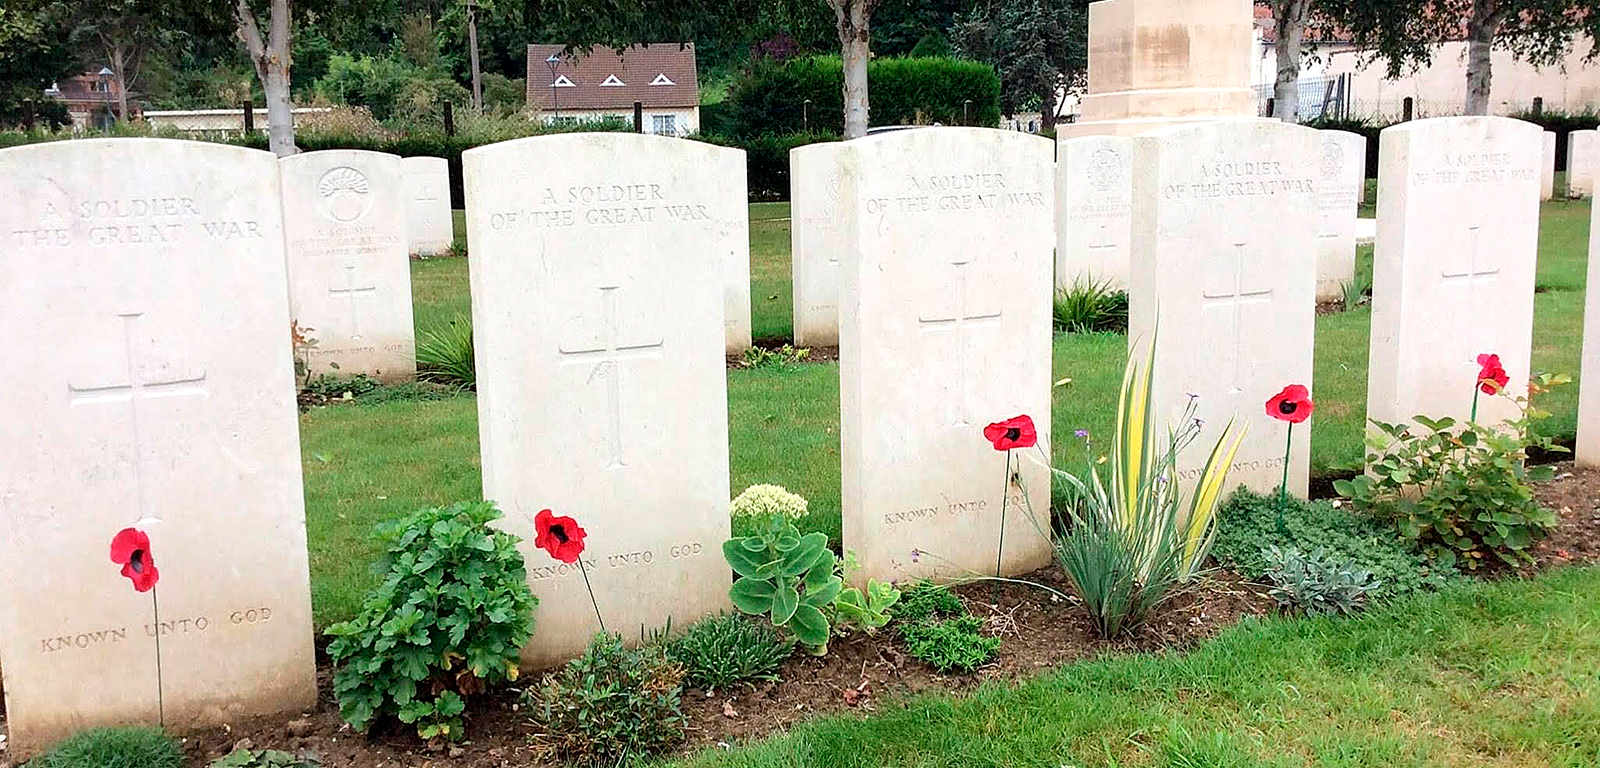 Five war graves from the Great War with a single poppy in front of each